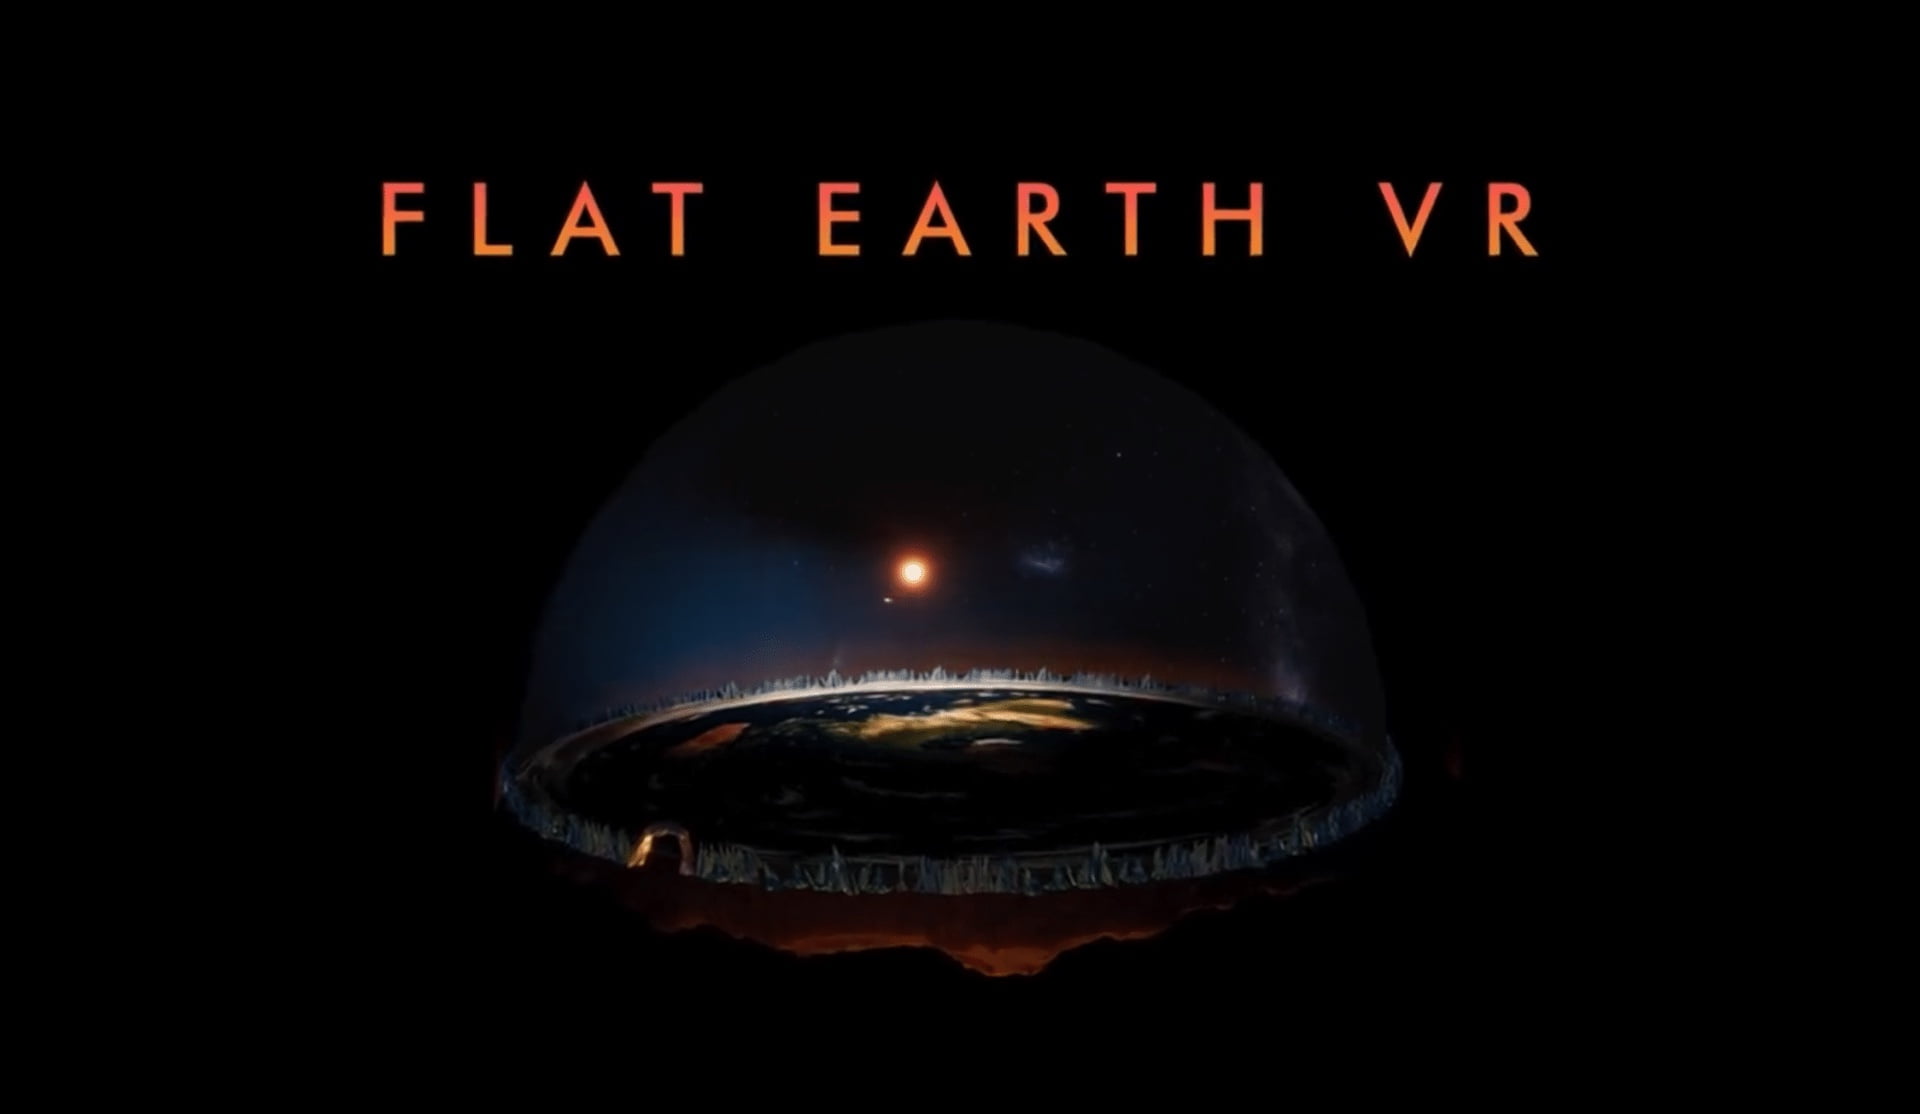 Flat Earth VR: New VR game is the "ultimate flat earth fantasy"